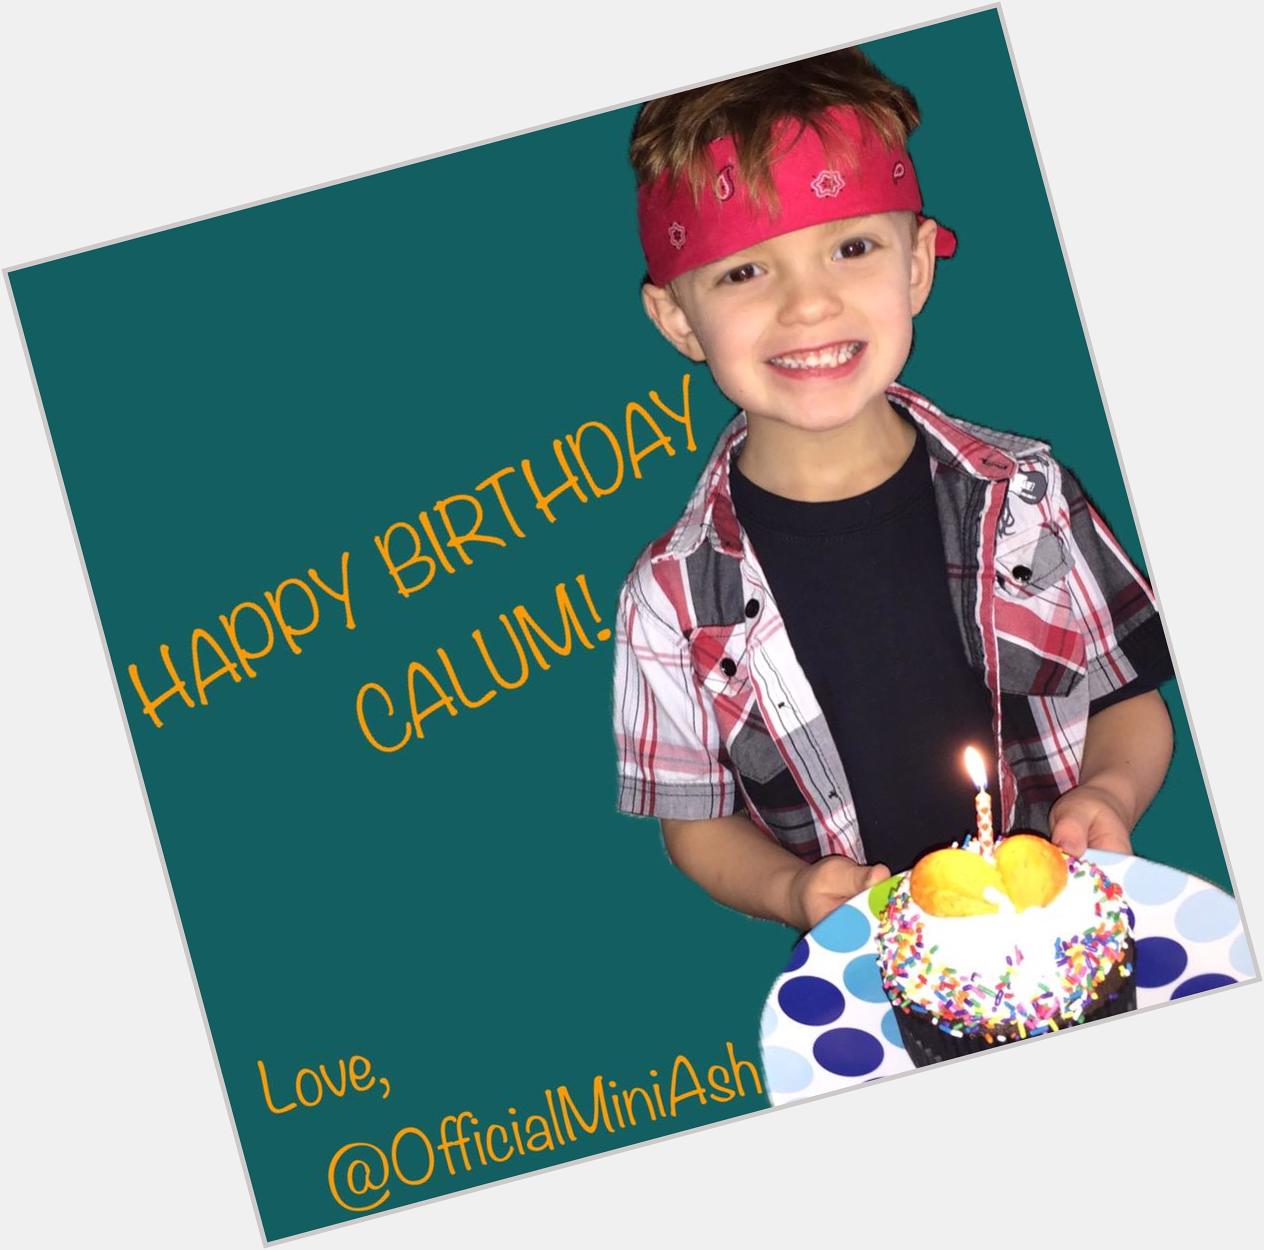 HAPPY BIRTHDAY CALUM HOOD FROM YOUR 5 YEAR OLD FAN!     